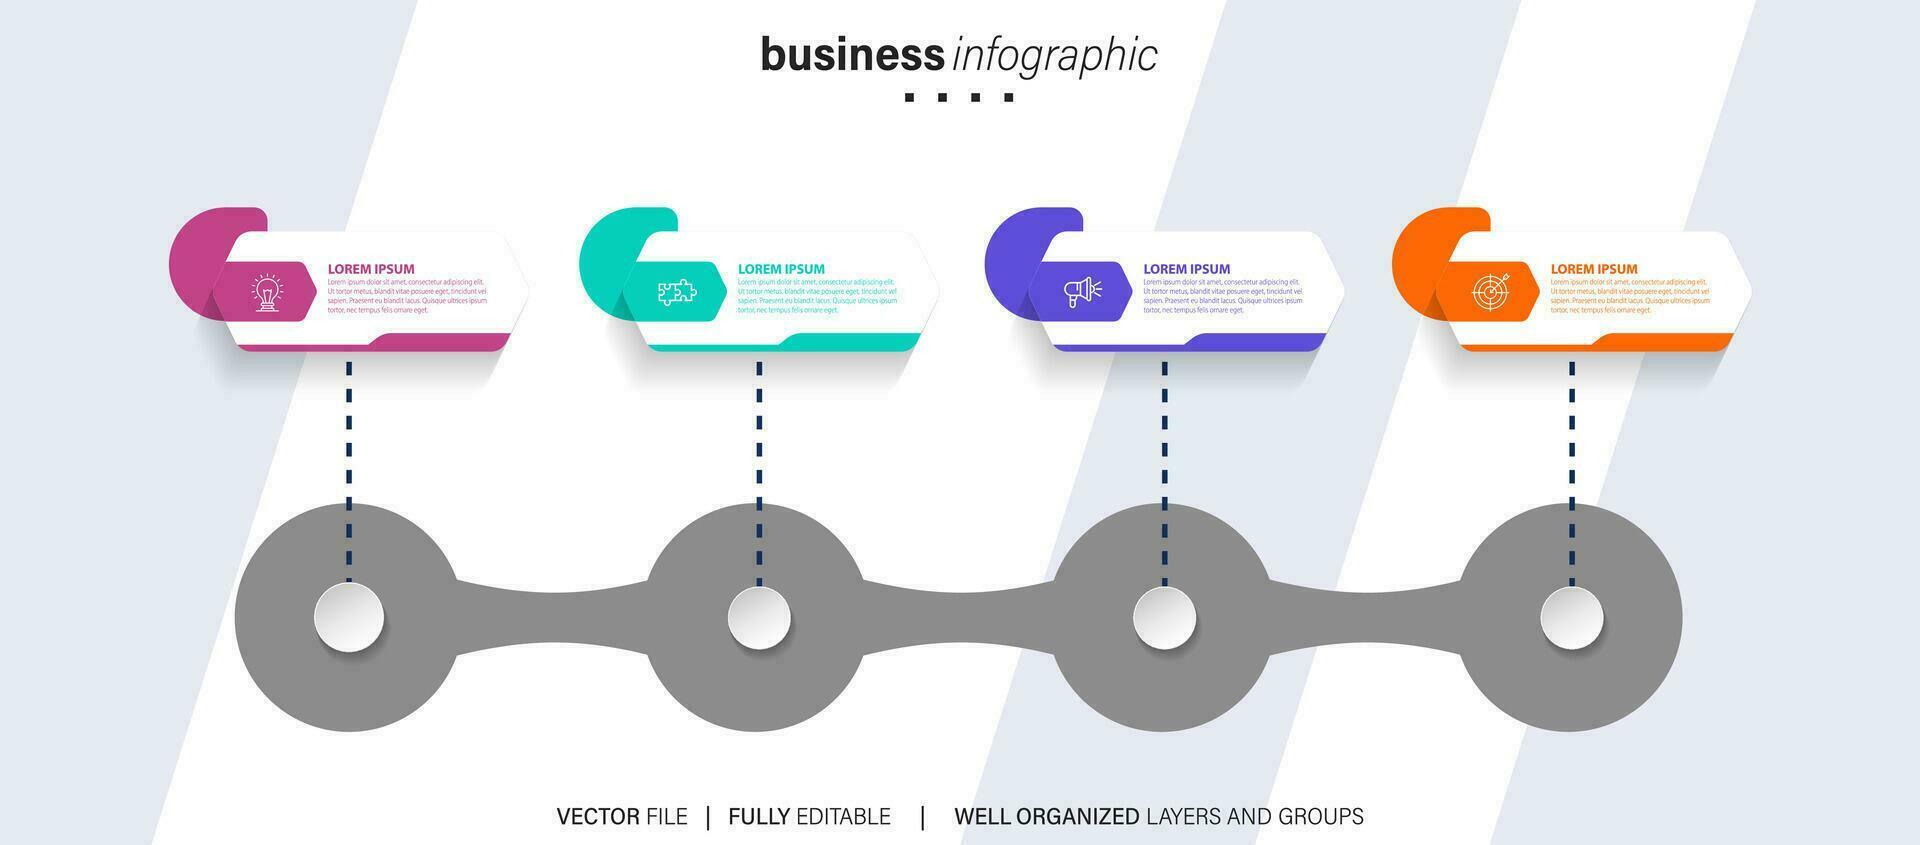 Timeline infographic with infochart. Modern presentation template with 4 spets for business process. Website template on white background for concept modern design. Horizontal layout. vector